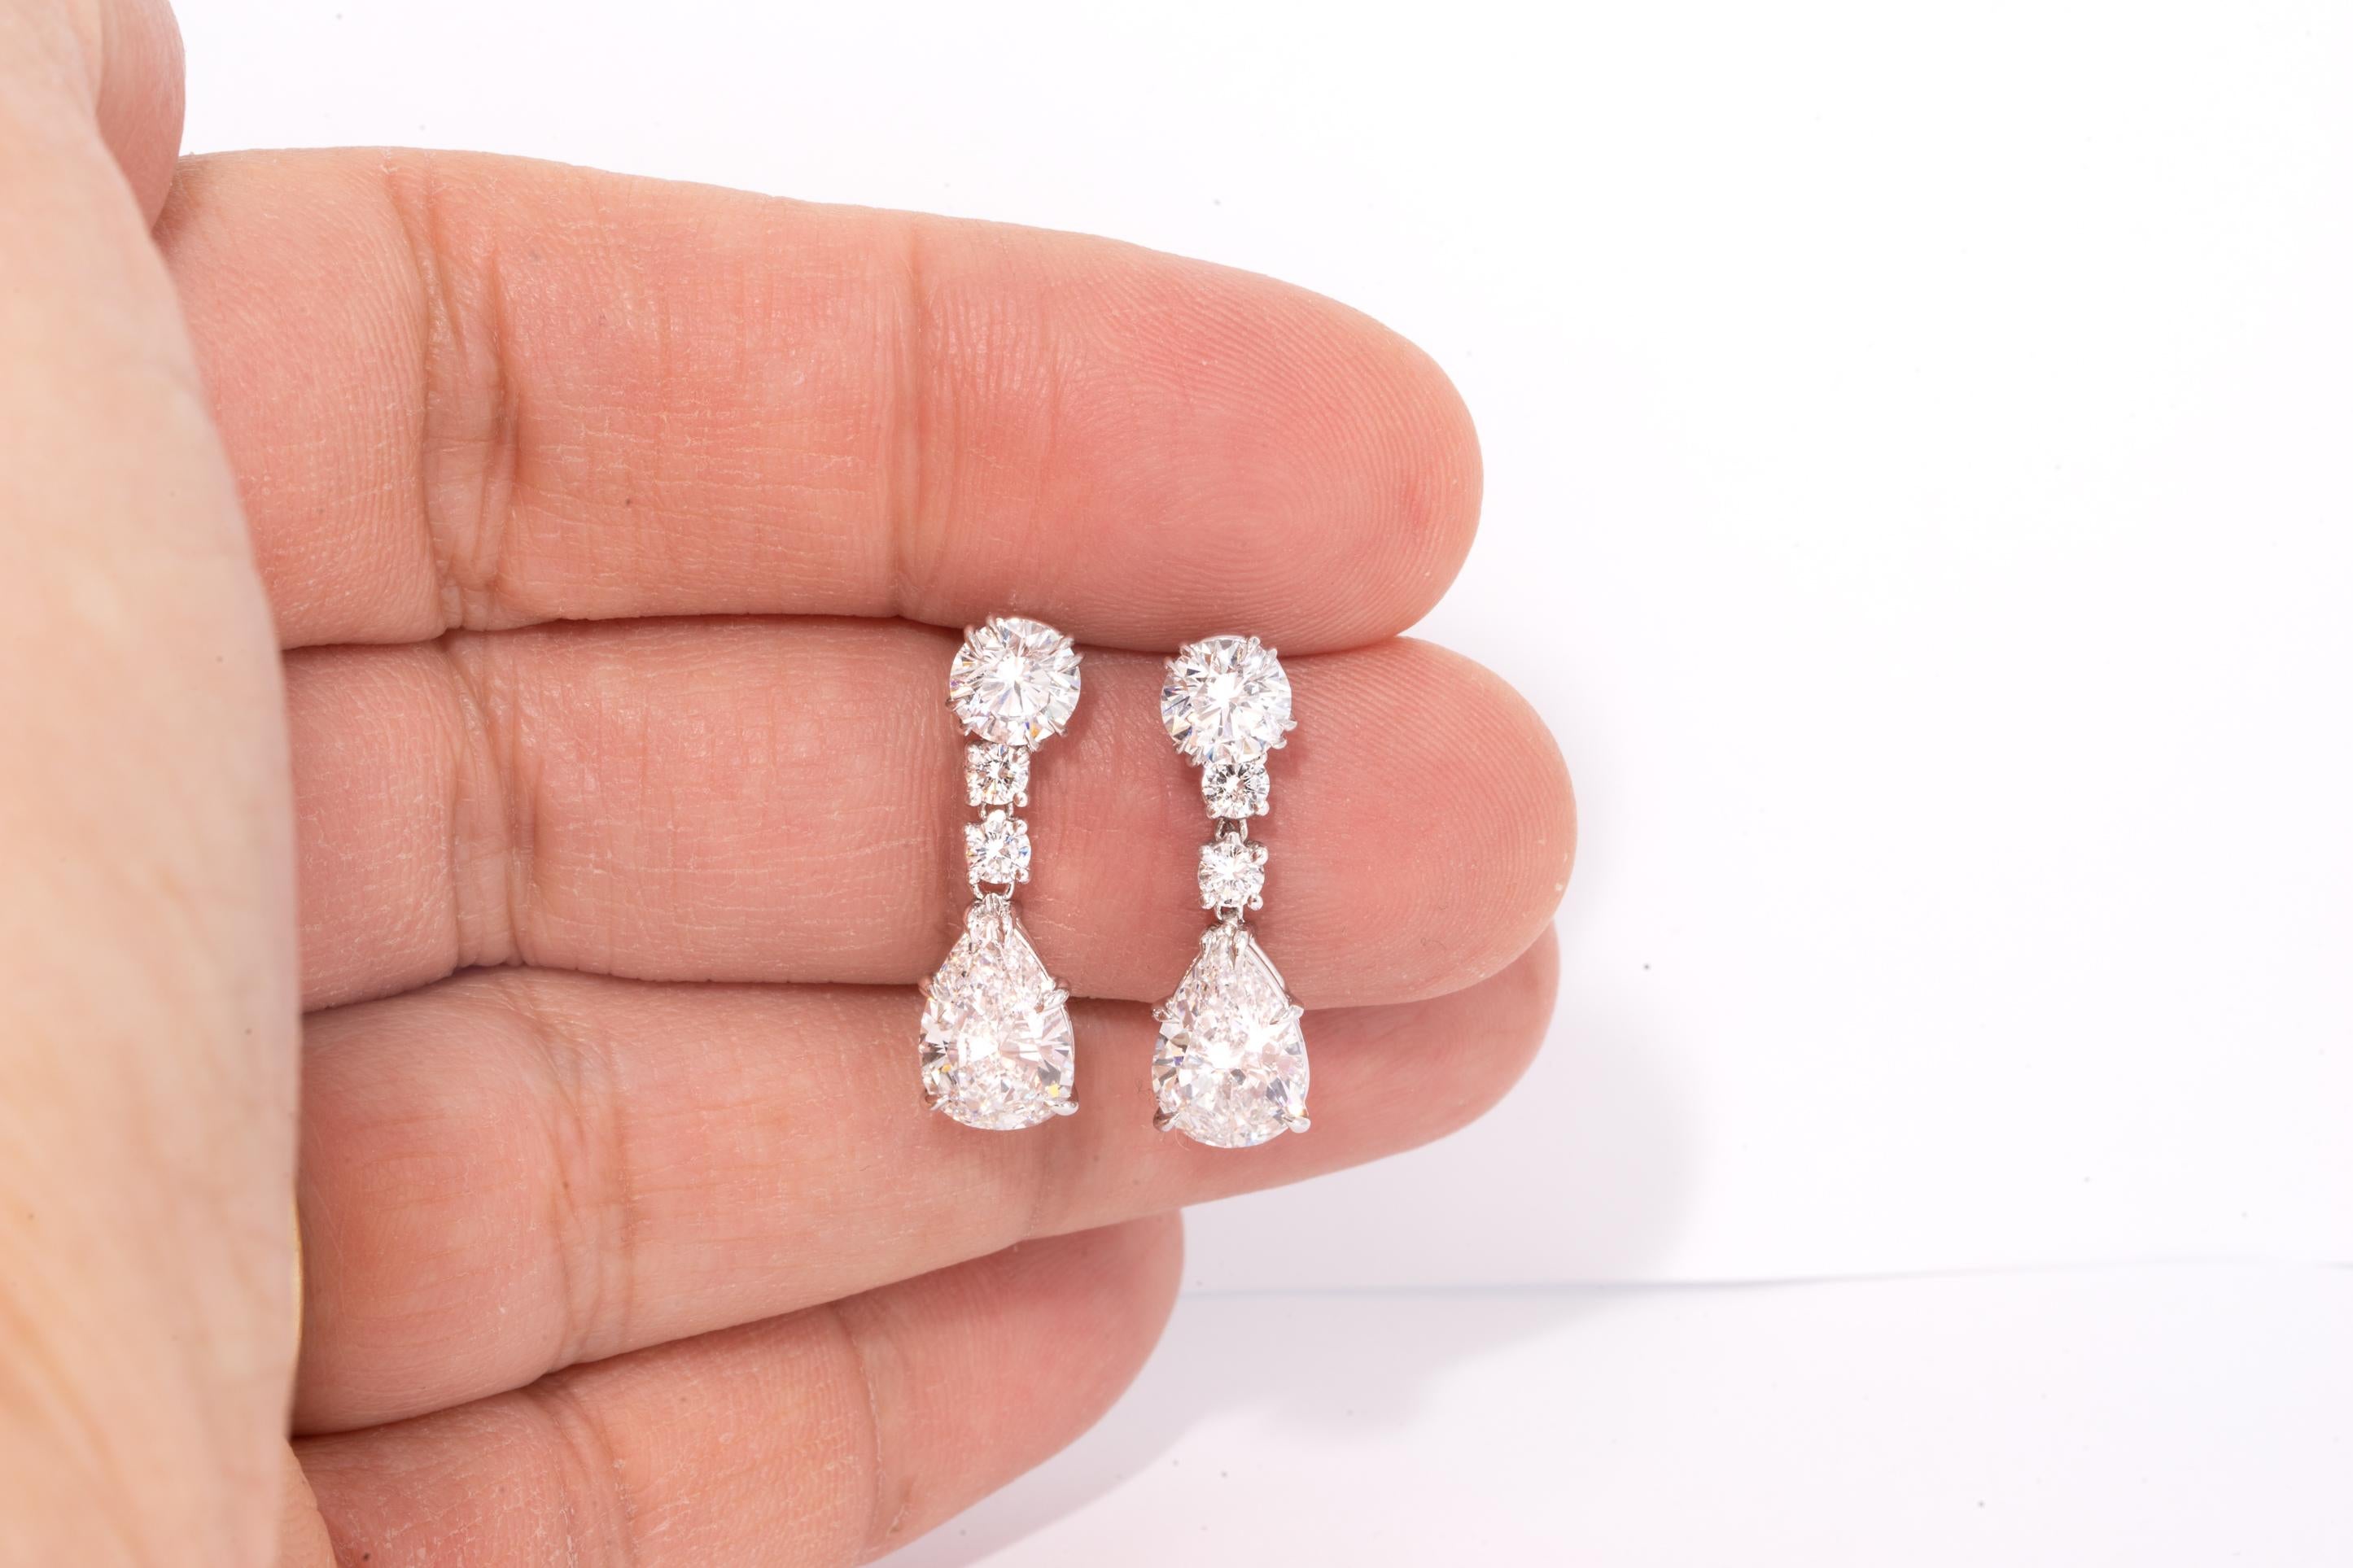 Pair of dangling earrings with 2 perfectly matched pear shape diamond centers
Pear Shape centers weigh 4.02 carats total 
Larger Round Centers weigh 1.81 carats total, 
Smaller rounds weigh .48 carats total
Total diamond carat weight , is 6.31